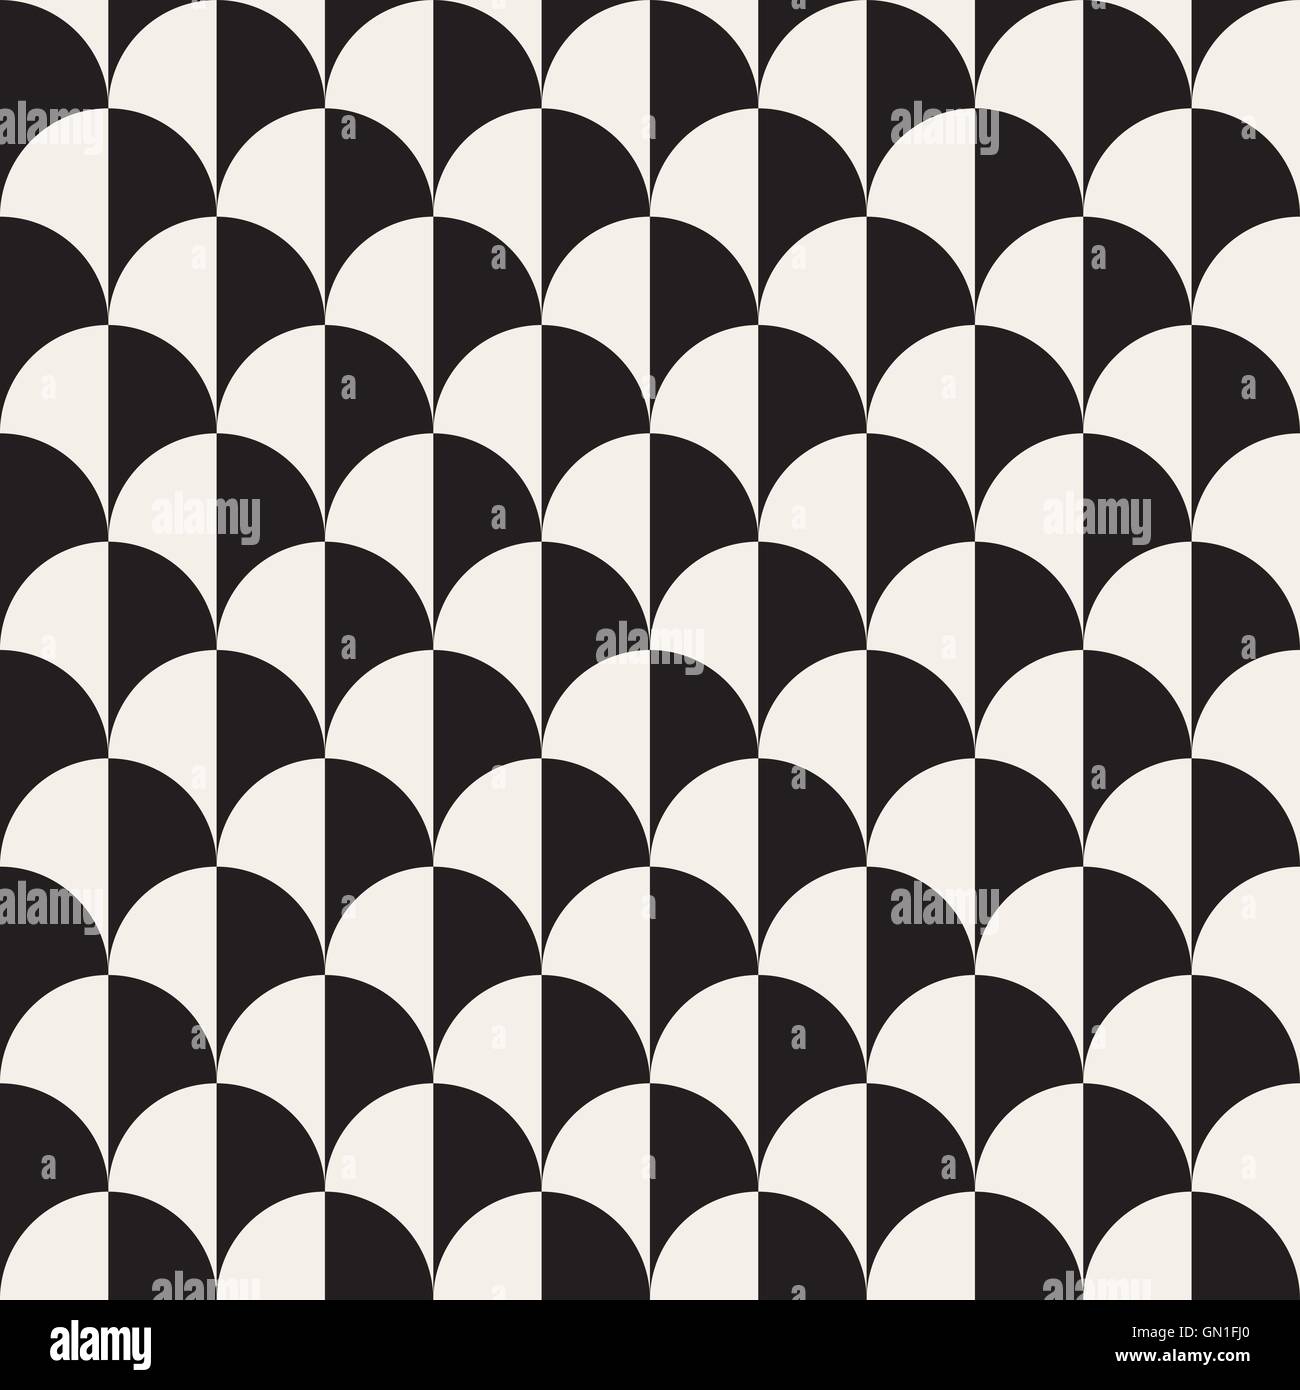 Vector Seamless Black And White Overlapping Semi Circle Pattern Stock Vector